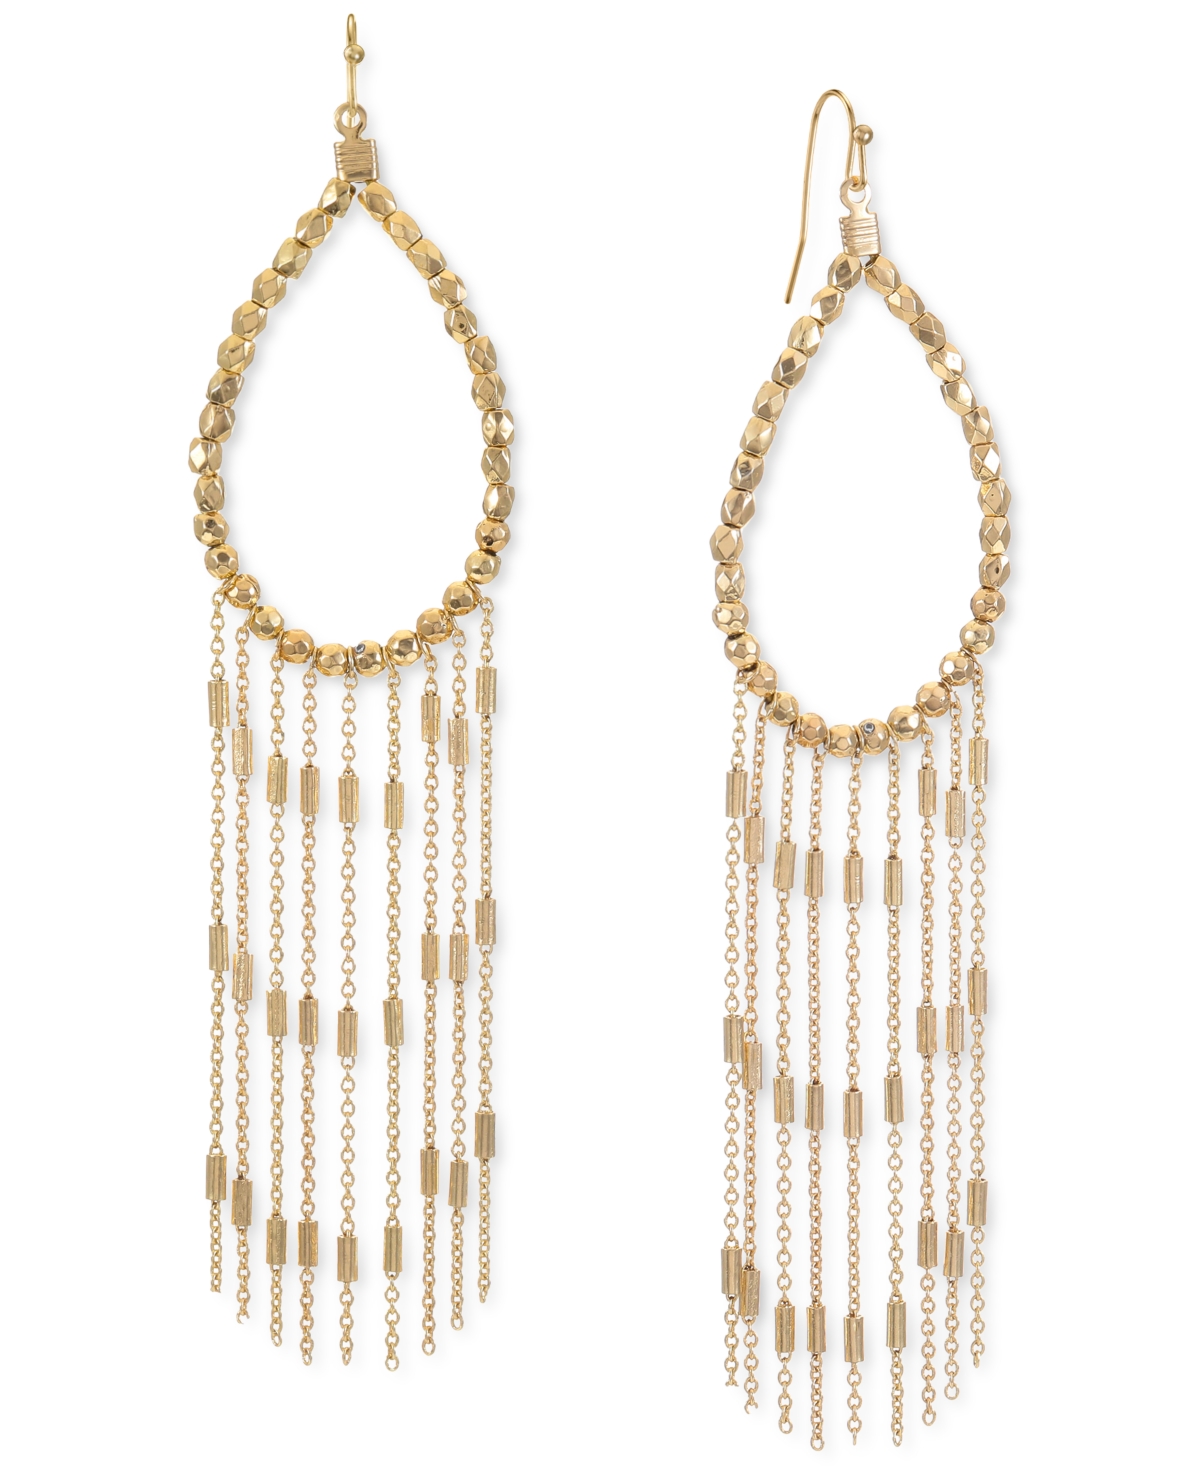 Gold-Tone Beaded Pear-Shape & Fringe Statement Earrings, Created for Macy's - Gold